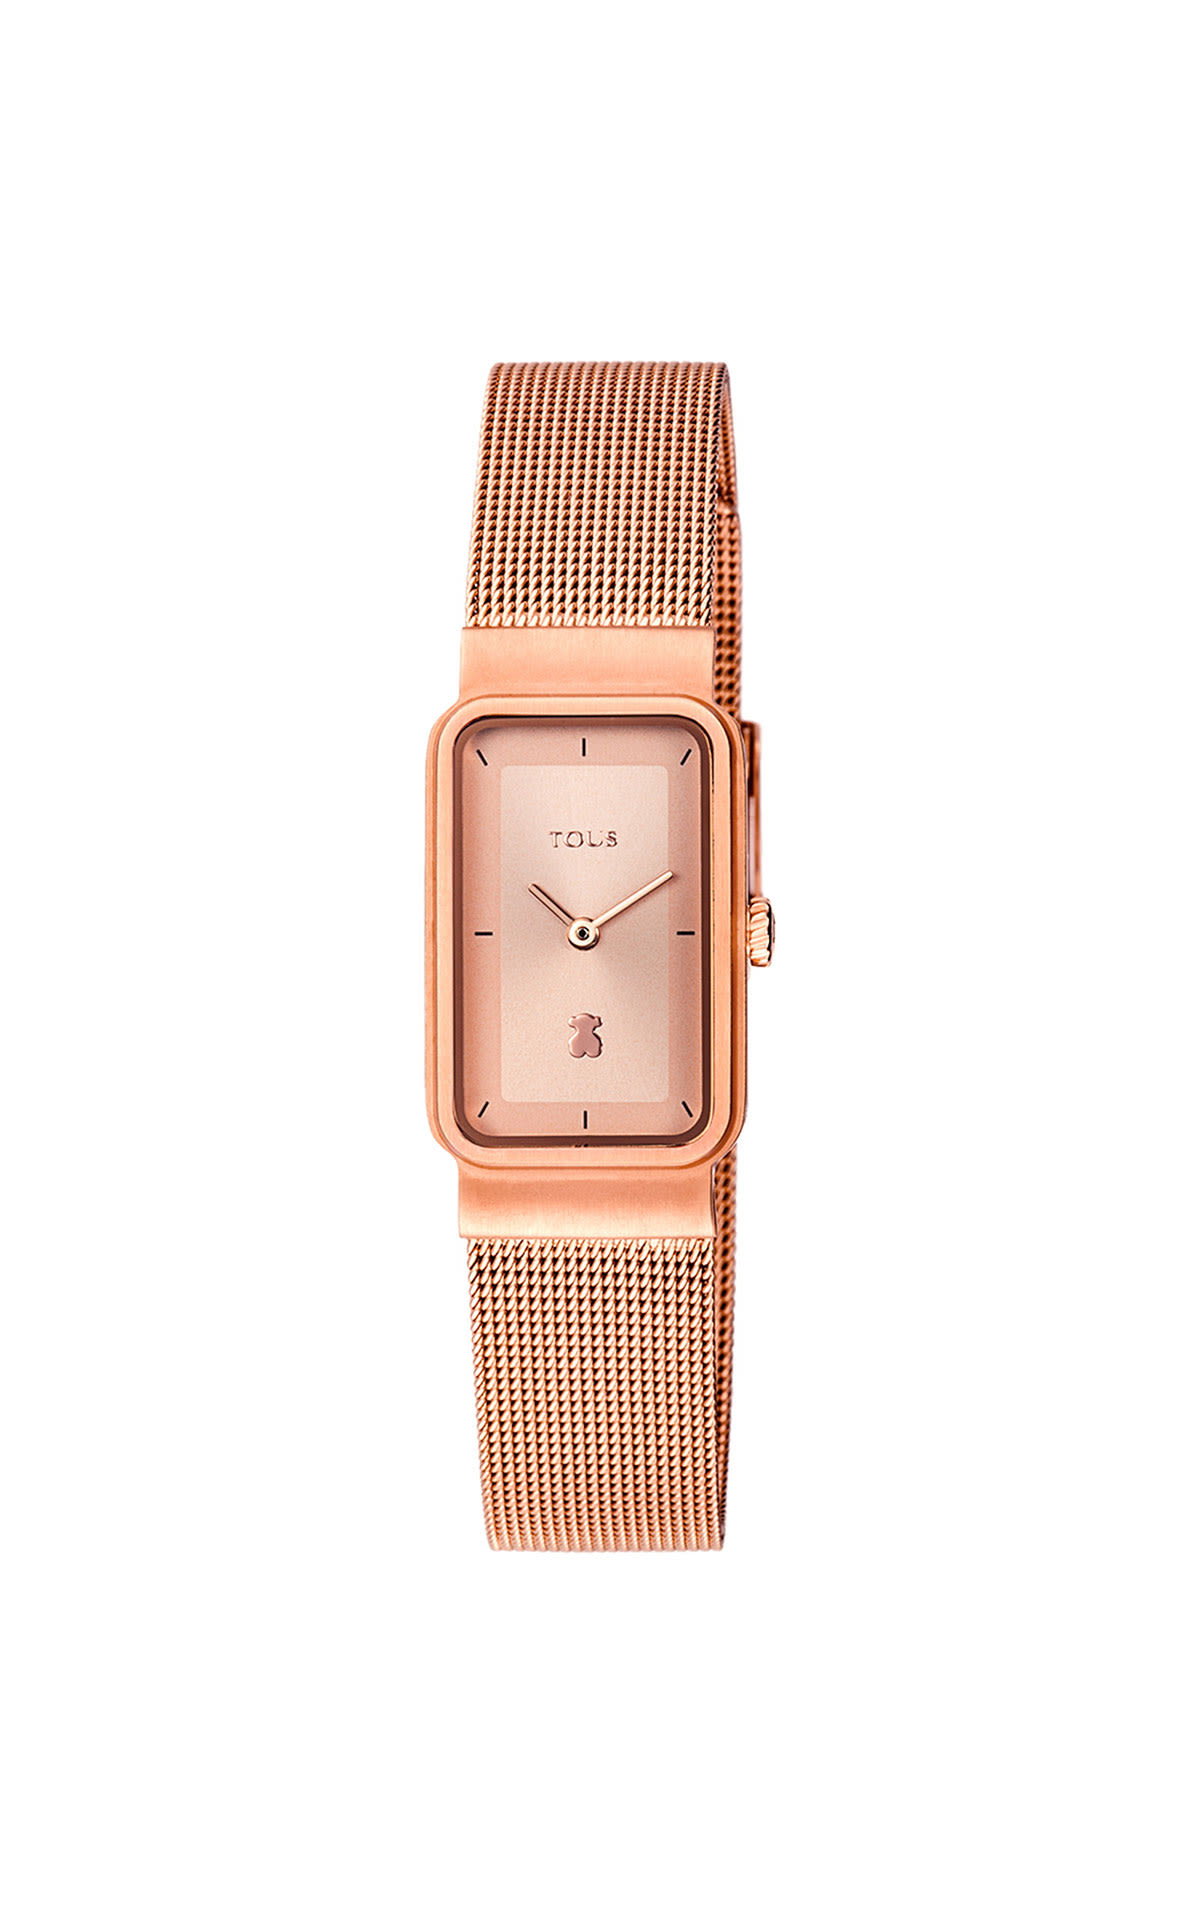 Tous rose gold warch